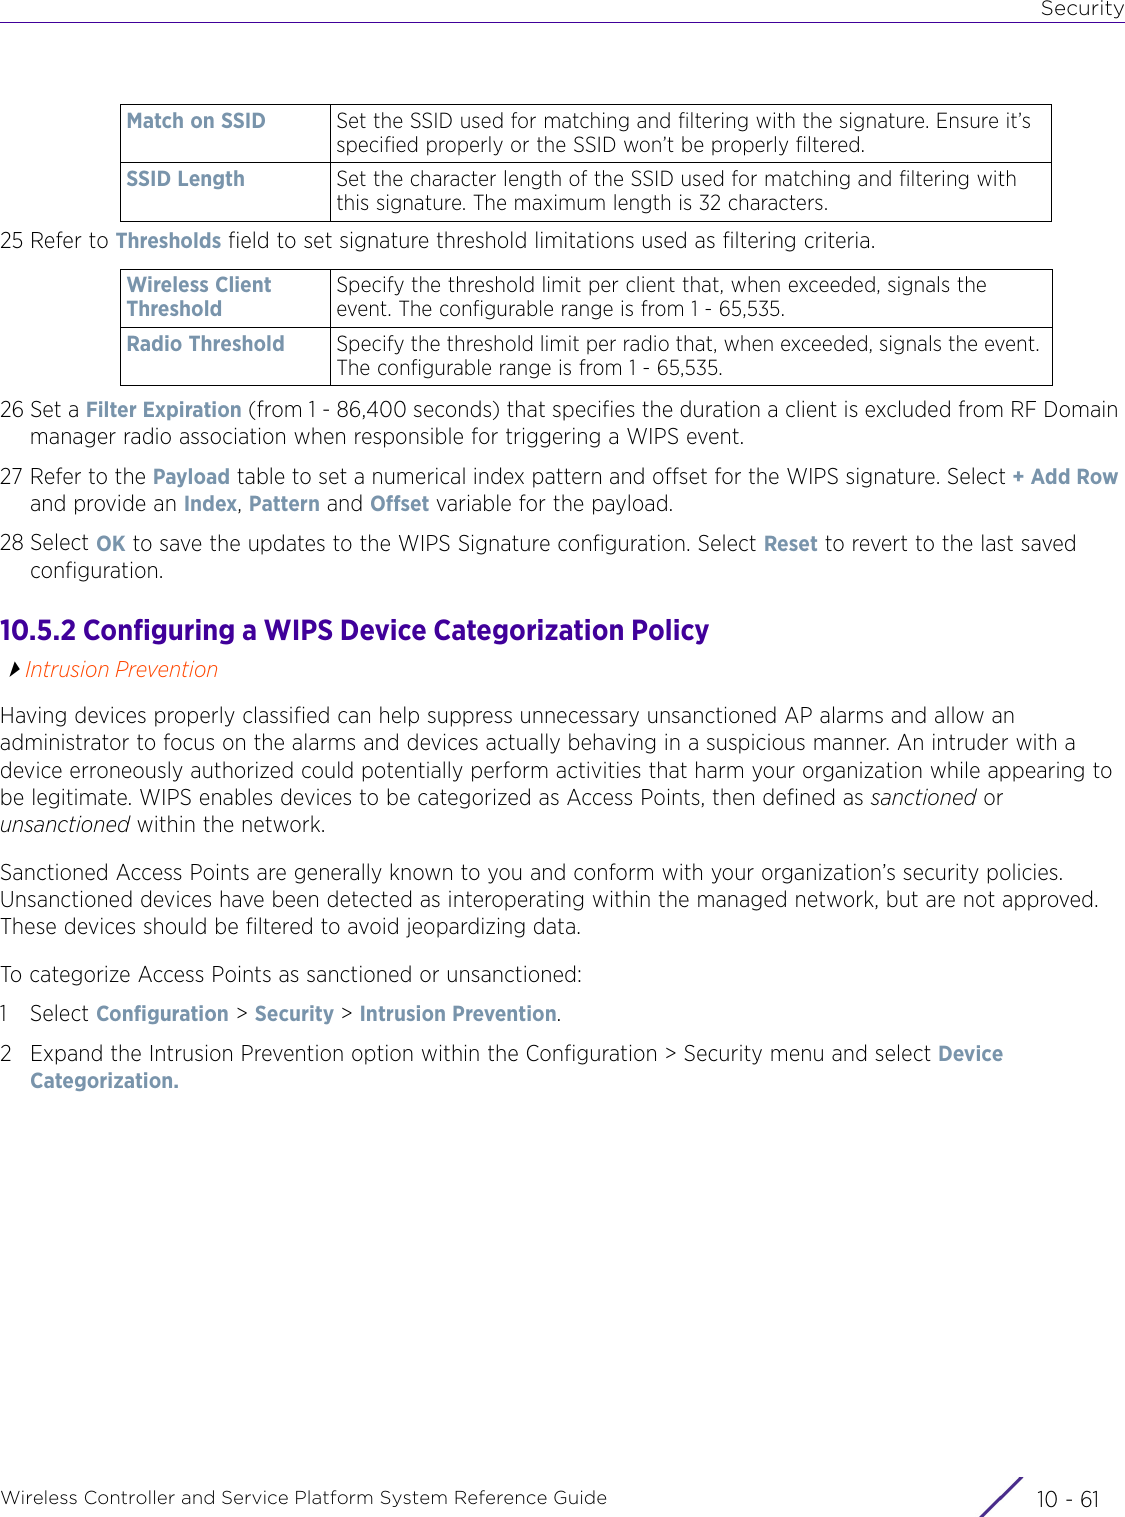 SecurityWireless Controller and Service Platform System Reference Guide 10 - 6125 Refer to Thresholds field to set signature threshold limitations used as filtering criteria.26 Set a Filter Expiration (from 1 - 86,400 seconds) that specifies the duration a client is excluded from RF Domain manager radio association when responsible for triggering a WIPS event.27 Refer to the Payload table to set a numerical index pattern and offset for the WIPS signature. Select + Add Row and provide an Index, Pattern and Offset variable for the payload.28 Select OK to save the updates to the WIPS Signature configuration. Select Reset to revert to the last saved configuration.10.5.2 Configuring a WIPS Device Categorization PolicyIntrusion PreventionHaving devices properly classified can help suppress unnecessary unsanctioned AP alarms and allow an administrator to focus on the alarms and devices actually behaving in a suspicious manner. An intruder with a device erroneously authorized could potentially perform activities that harm your organization while appearing to be legitimate. WIPS enables devices to be categorized as Access Points, then defined as sanctioned or unsanctioned within the network.Sanctioned Access Points are generally known to you and conform with your organization’s security policies. Unsanctioned devices have been detected as interoperating within the managed network, but are not approved. These devices should be filtered to avoid jeopardizing data.To categorize Access Points as sanctioned or unsanctioned:1Select Configuration &gt; Security &gt; Intrusion Prevention.2 Expand the Intrusion Prevention option within the Configuration &gt; Security menu and select Device Categorization.Match on SSID Set the SSID used for matching and filtering with the signature. Ensure it’s specified properly or the SSID won’t be properly filtered.SSID Length Set the character length of the SSID used for matching and filtering with this signature. The maximum length is 32 characters.Wireless Client ThresholdSpecify the threshold limit per client that, when exceeded, signals the event. The configurable range is from 1 - 65,535.Radio Threshold Specify the threshold limit per radio that, when exceeded, signals the event. The configurable range is from 1 - 65,535.